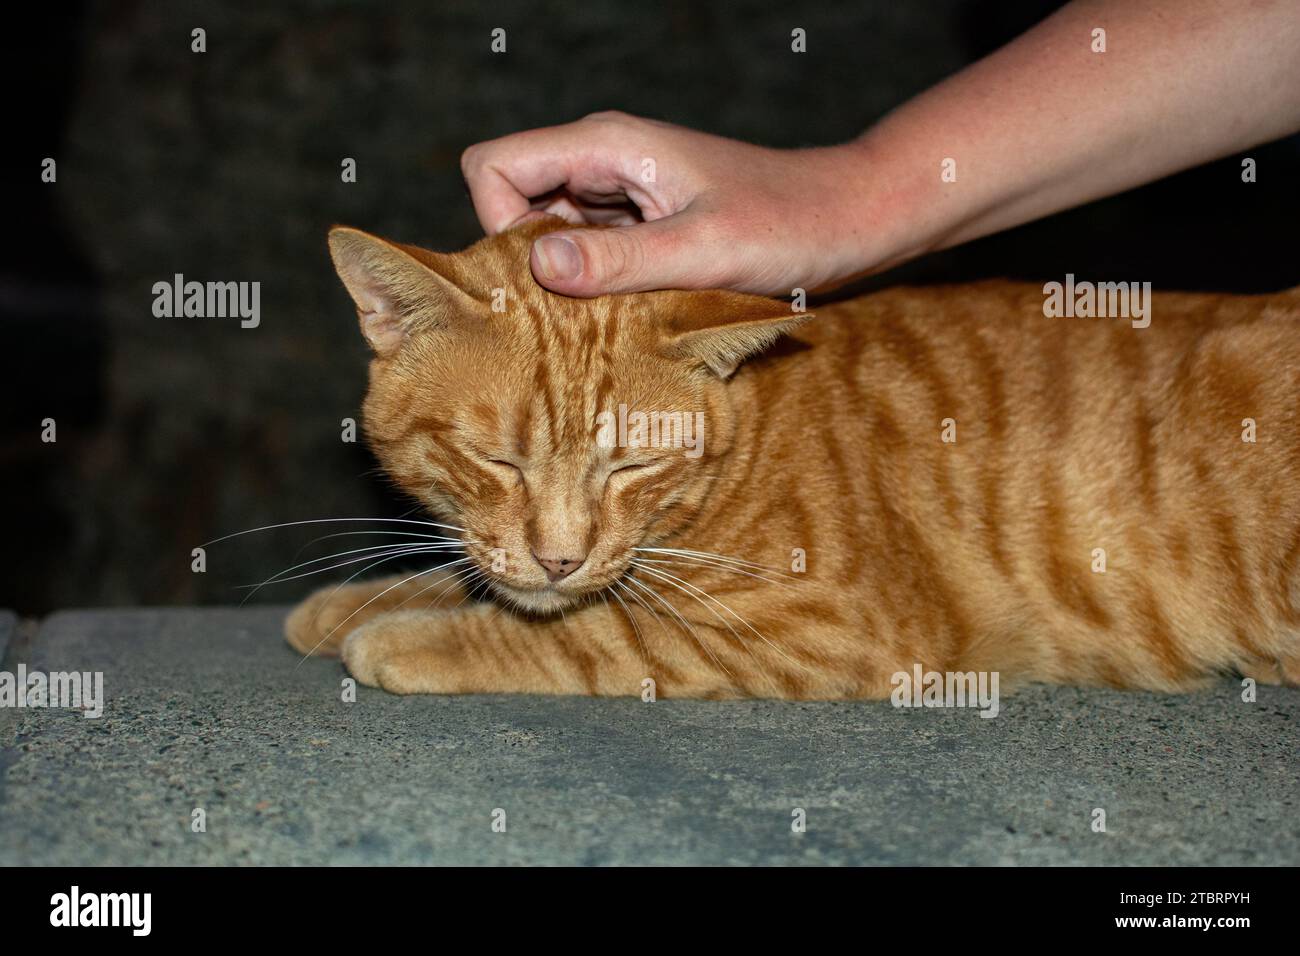 A person pets a wild red and white street cat, on the Canary Island of Gran Canaria in Spain Stock Photo